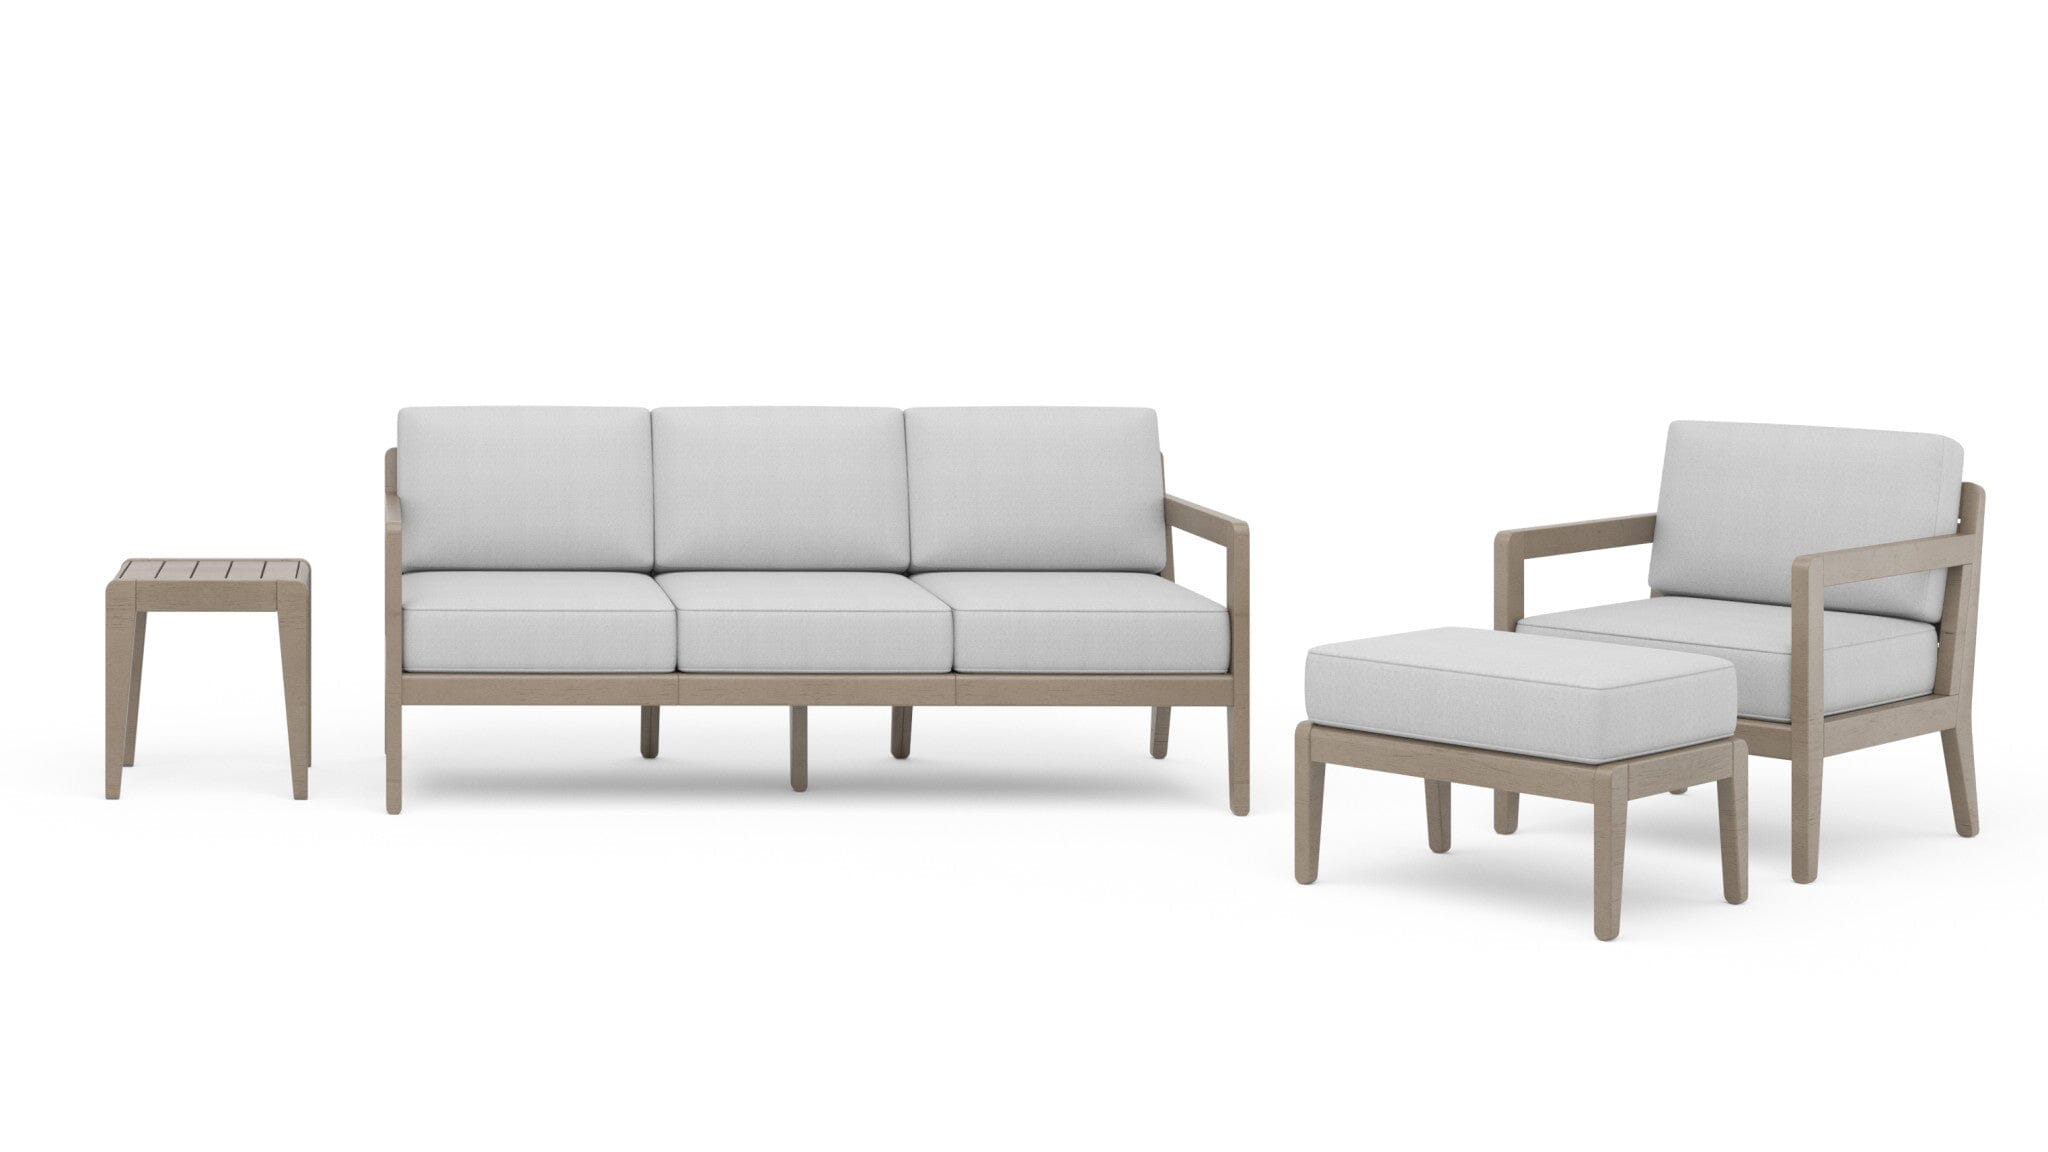 Transitional Outdoor Sofa 3-Piece Set By Sustain Sofa Sustain